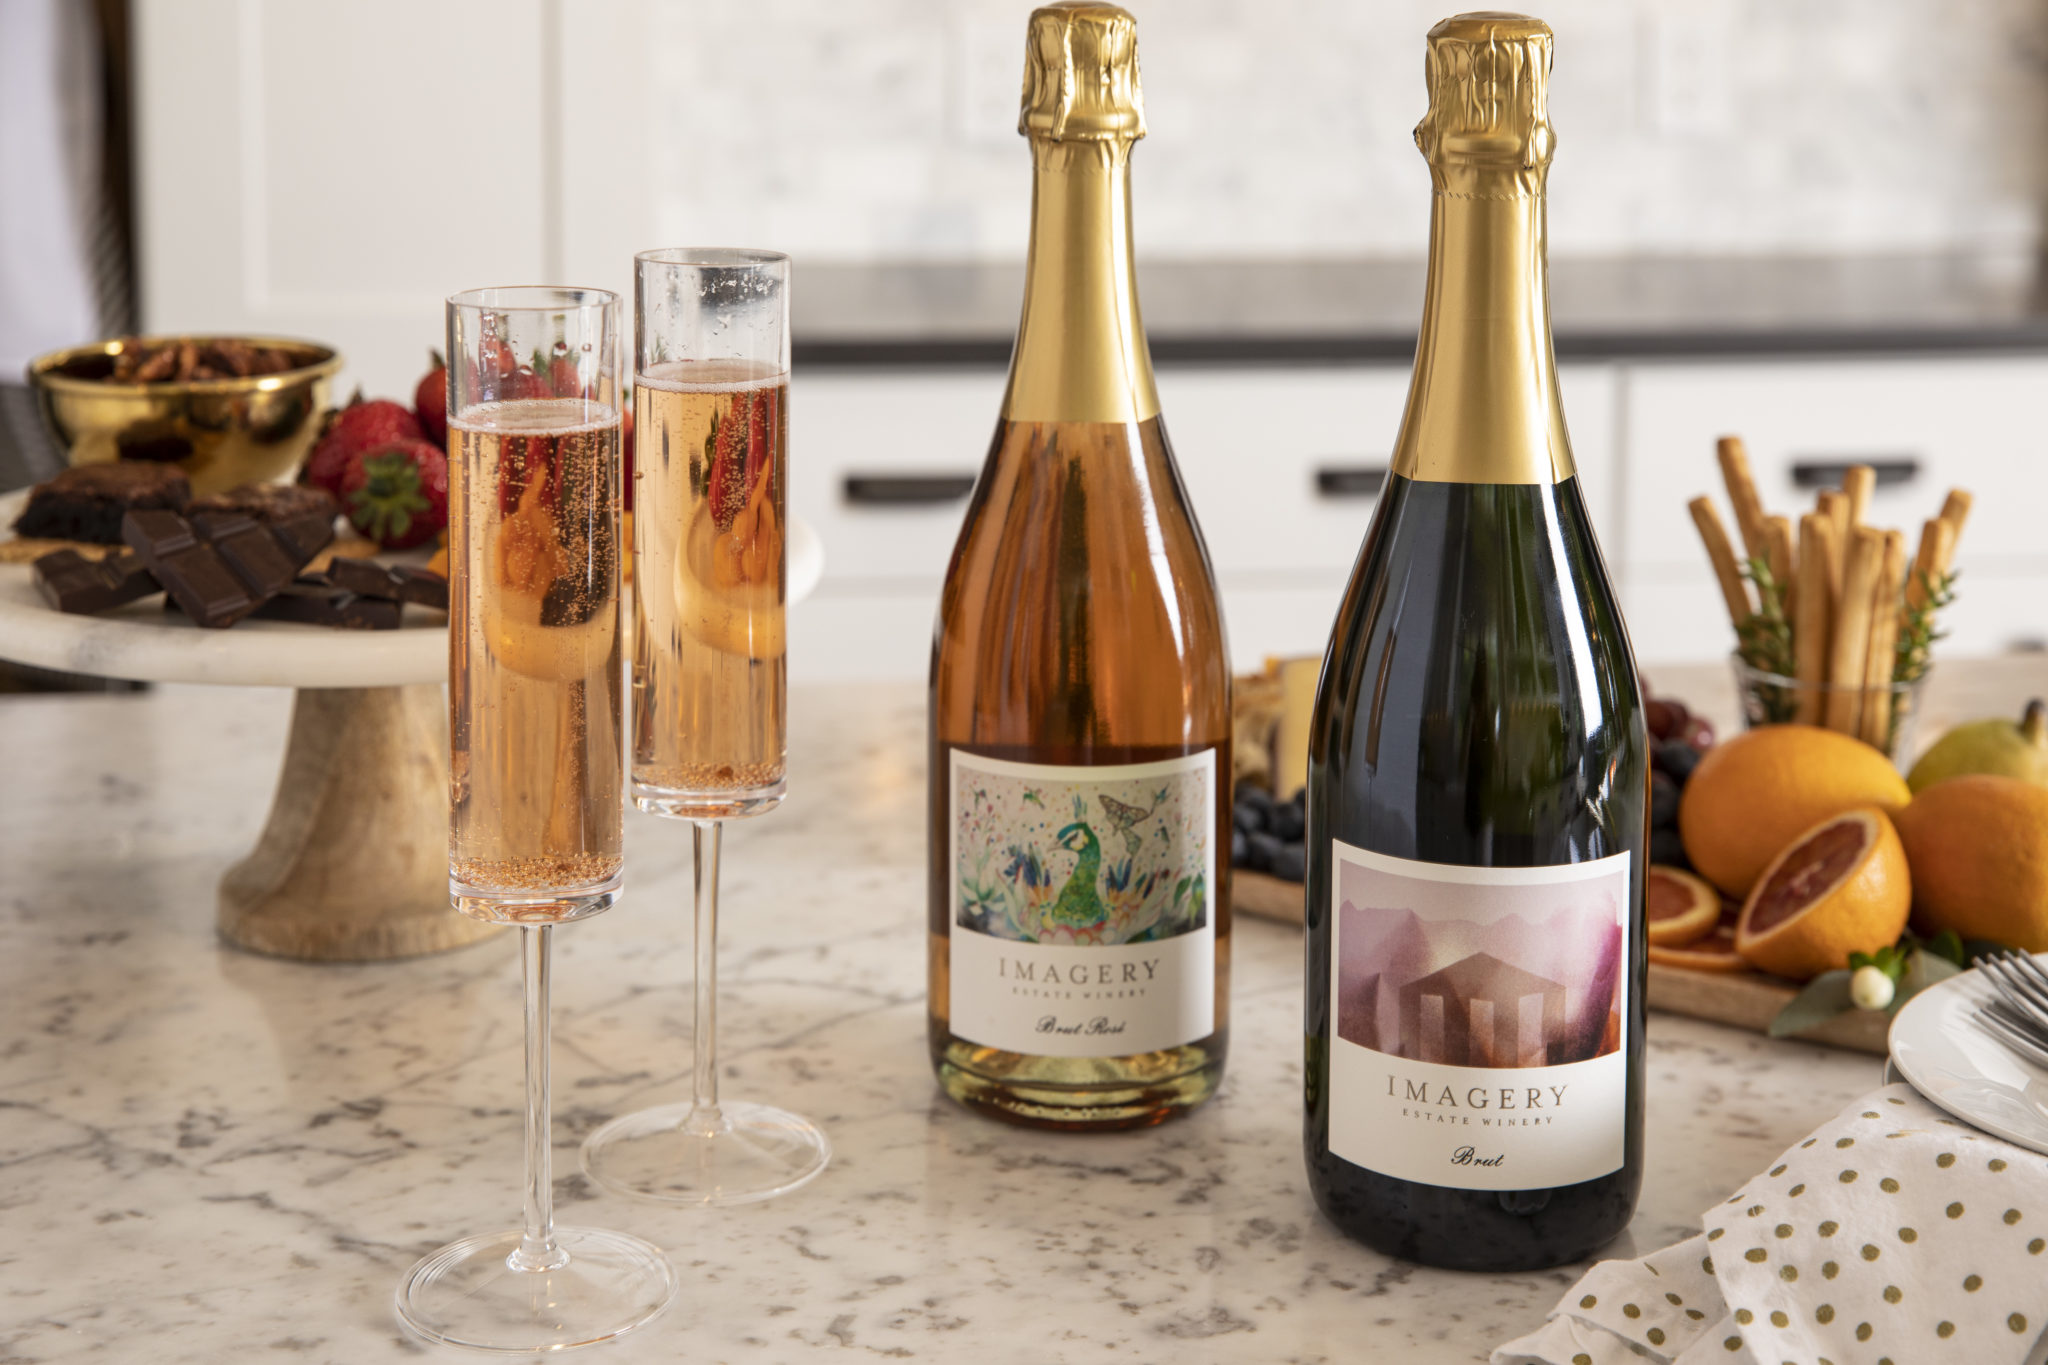 Best Sparkling Wines for the Holidays Imagery Estate Winery